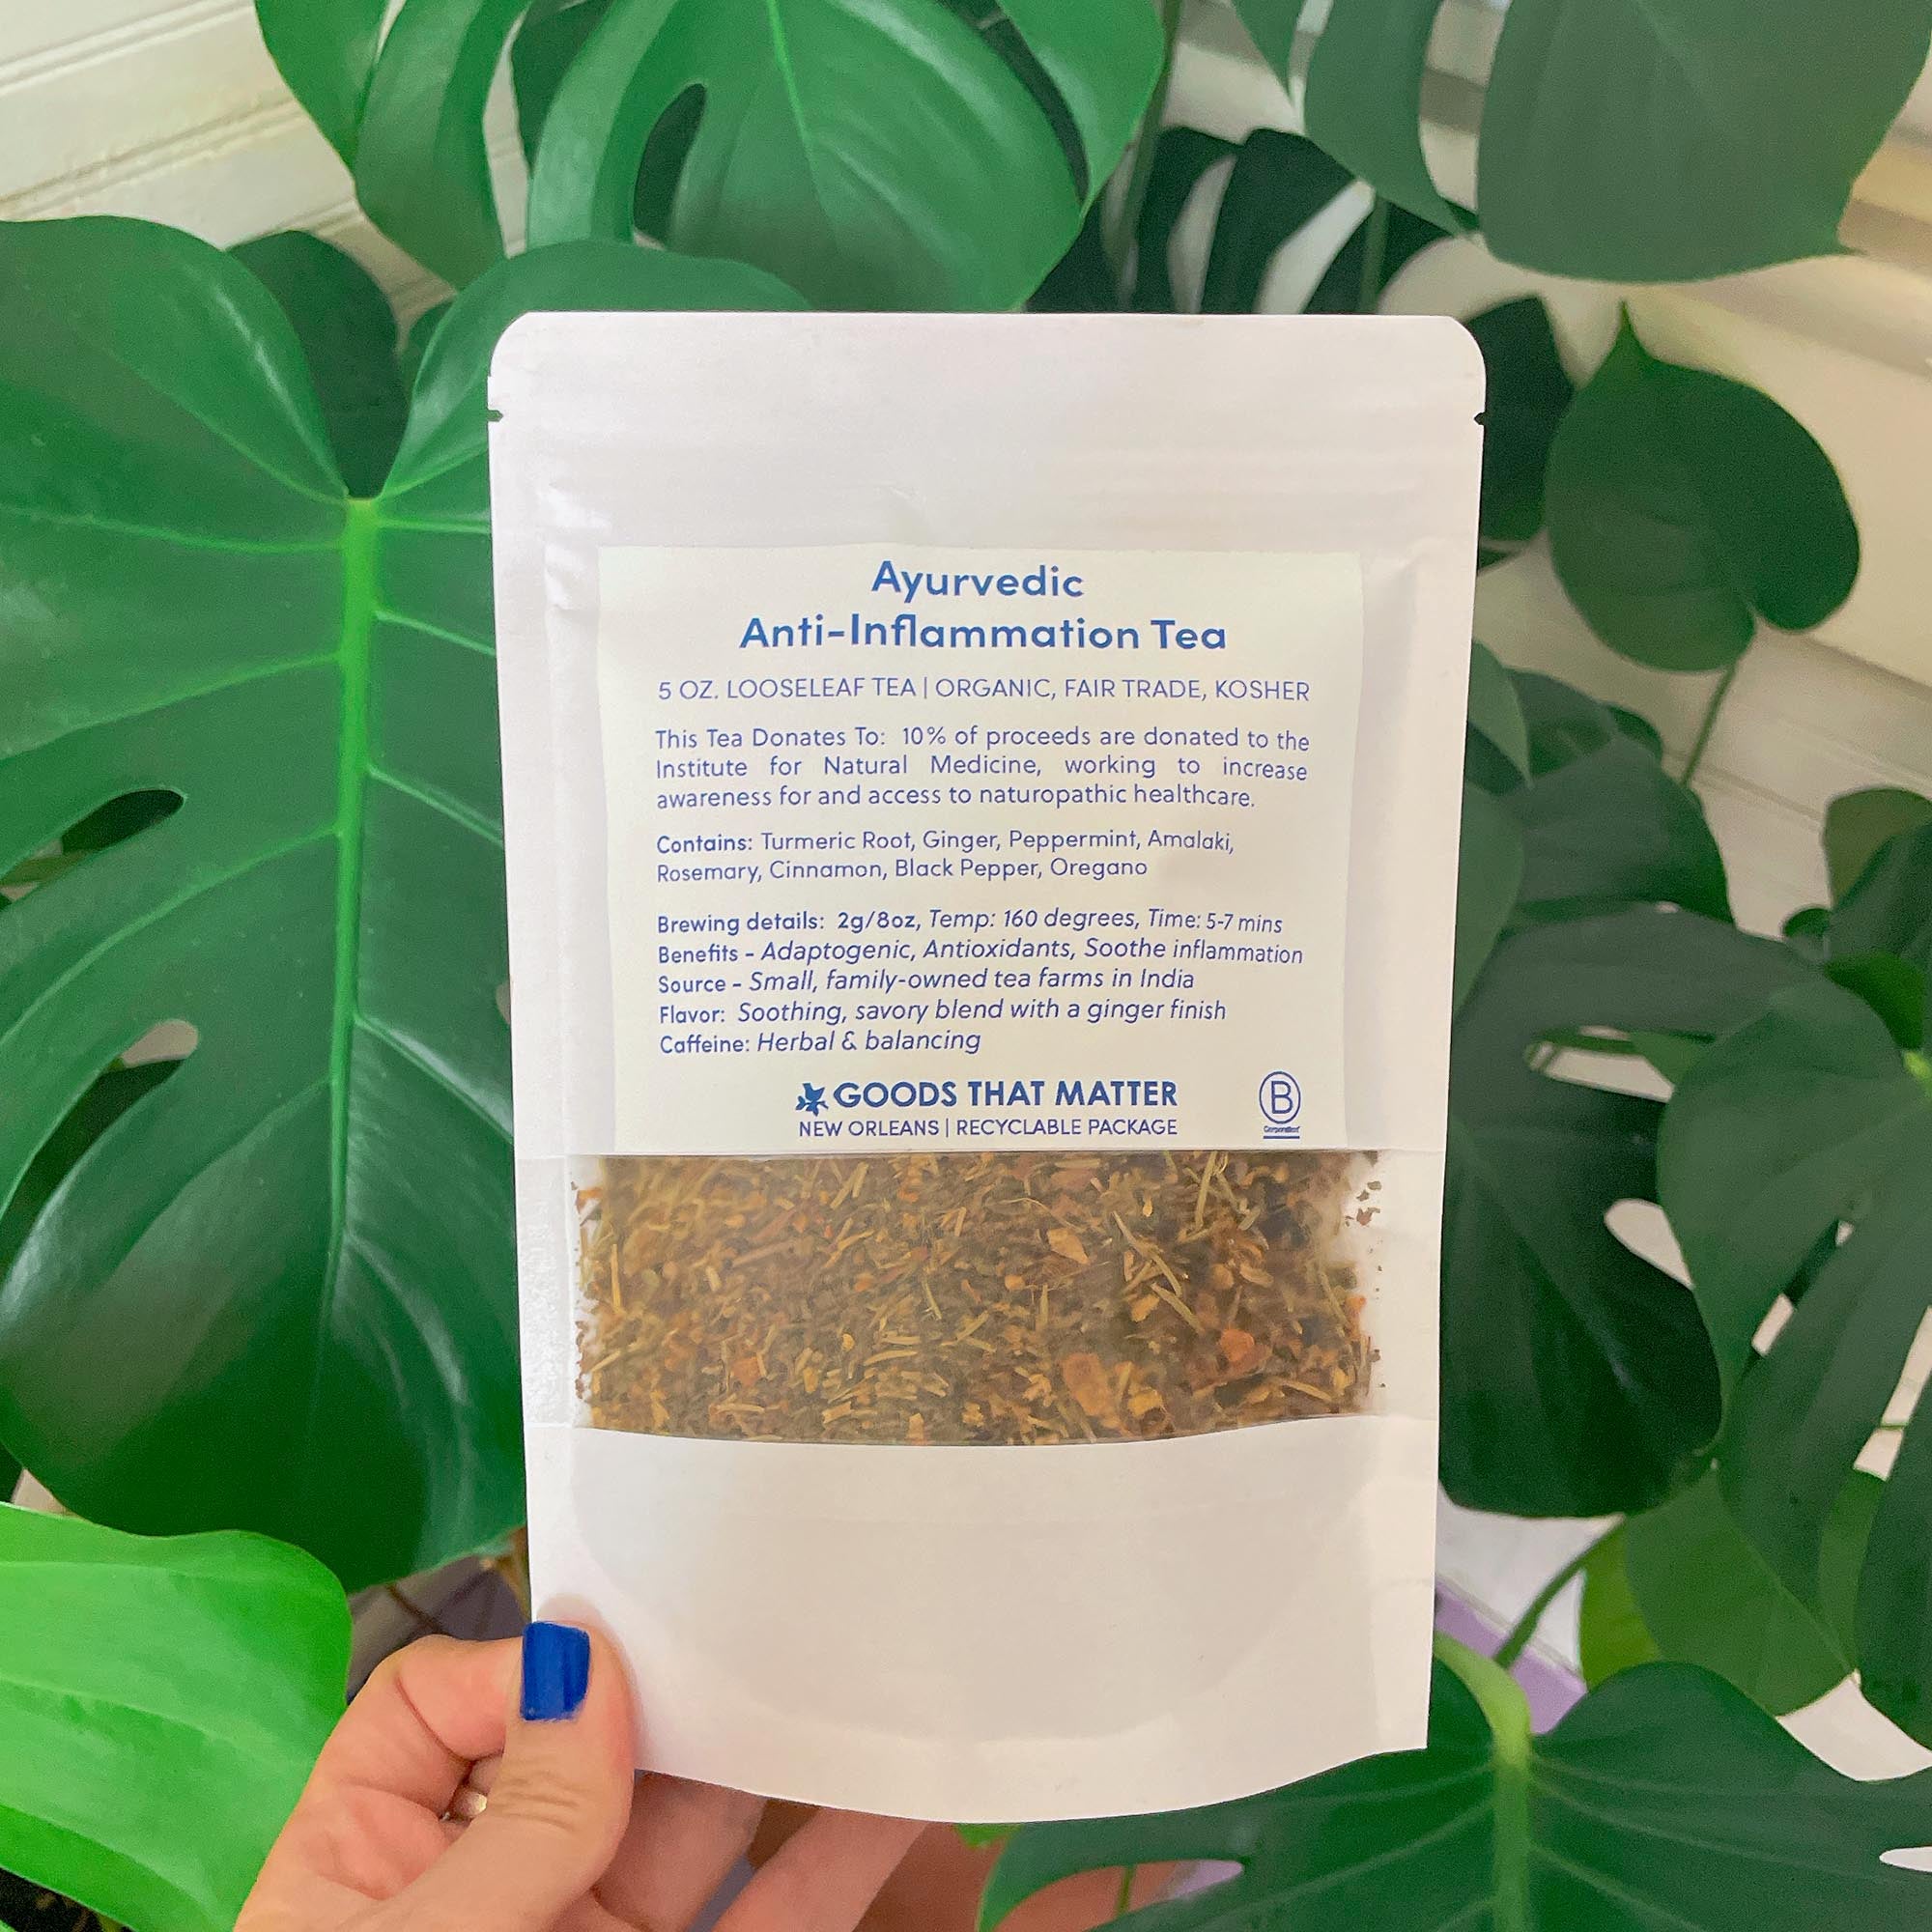 Anti-Inflammatory Ayurvedic Looseleaf Benevolent Tea - Gives to the Institute for Natural Medicine